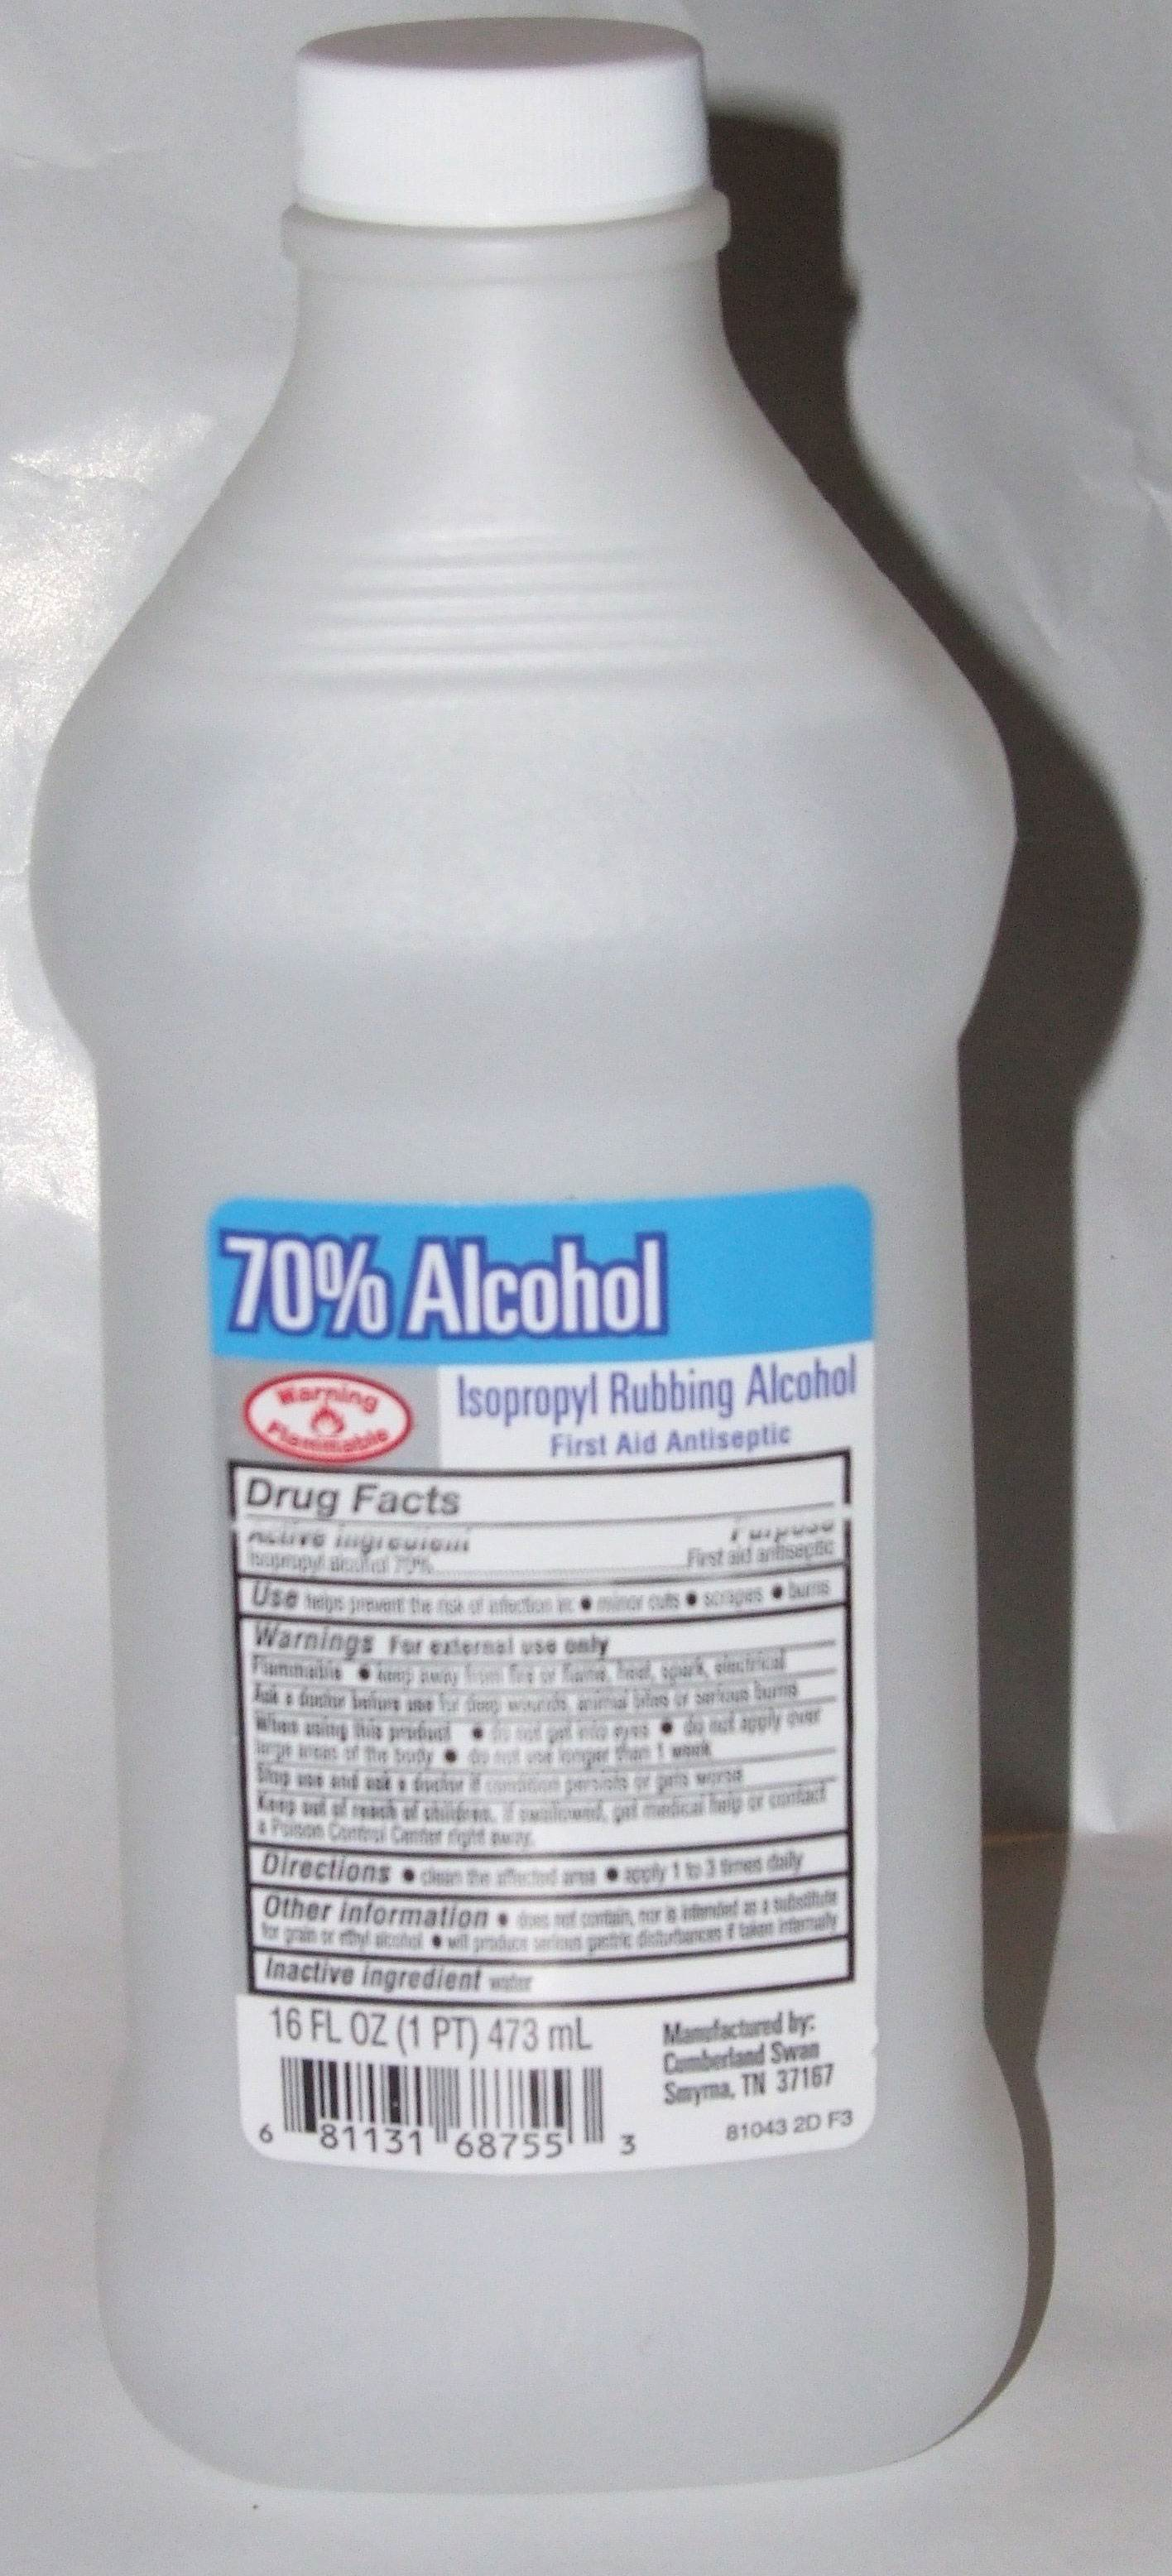 A bottle of 70% isopropyl rubbing alcohol is shown against a white background.